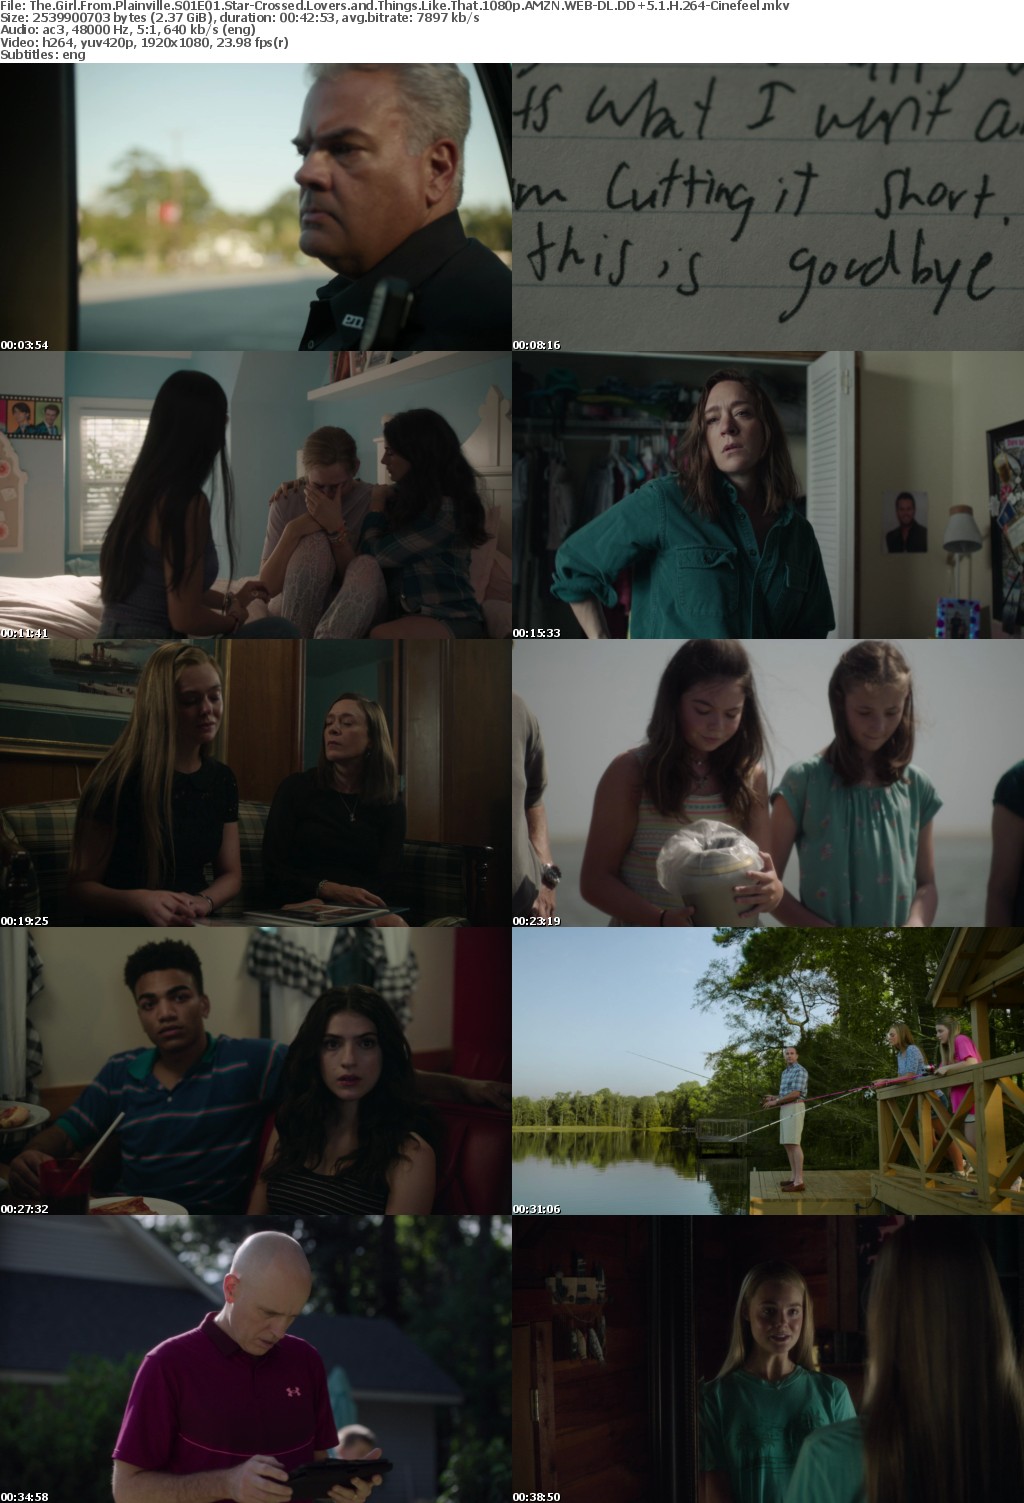 The Girl From Plainville S01E01 Star-Crossed Lovers and Things Like That 1080p AMZN WEBRip DDP5 1 x264-BTN